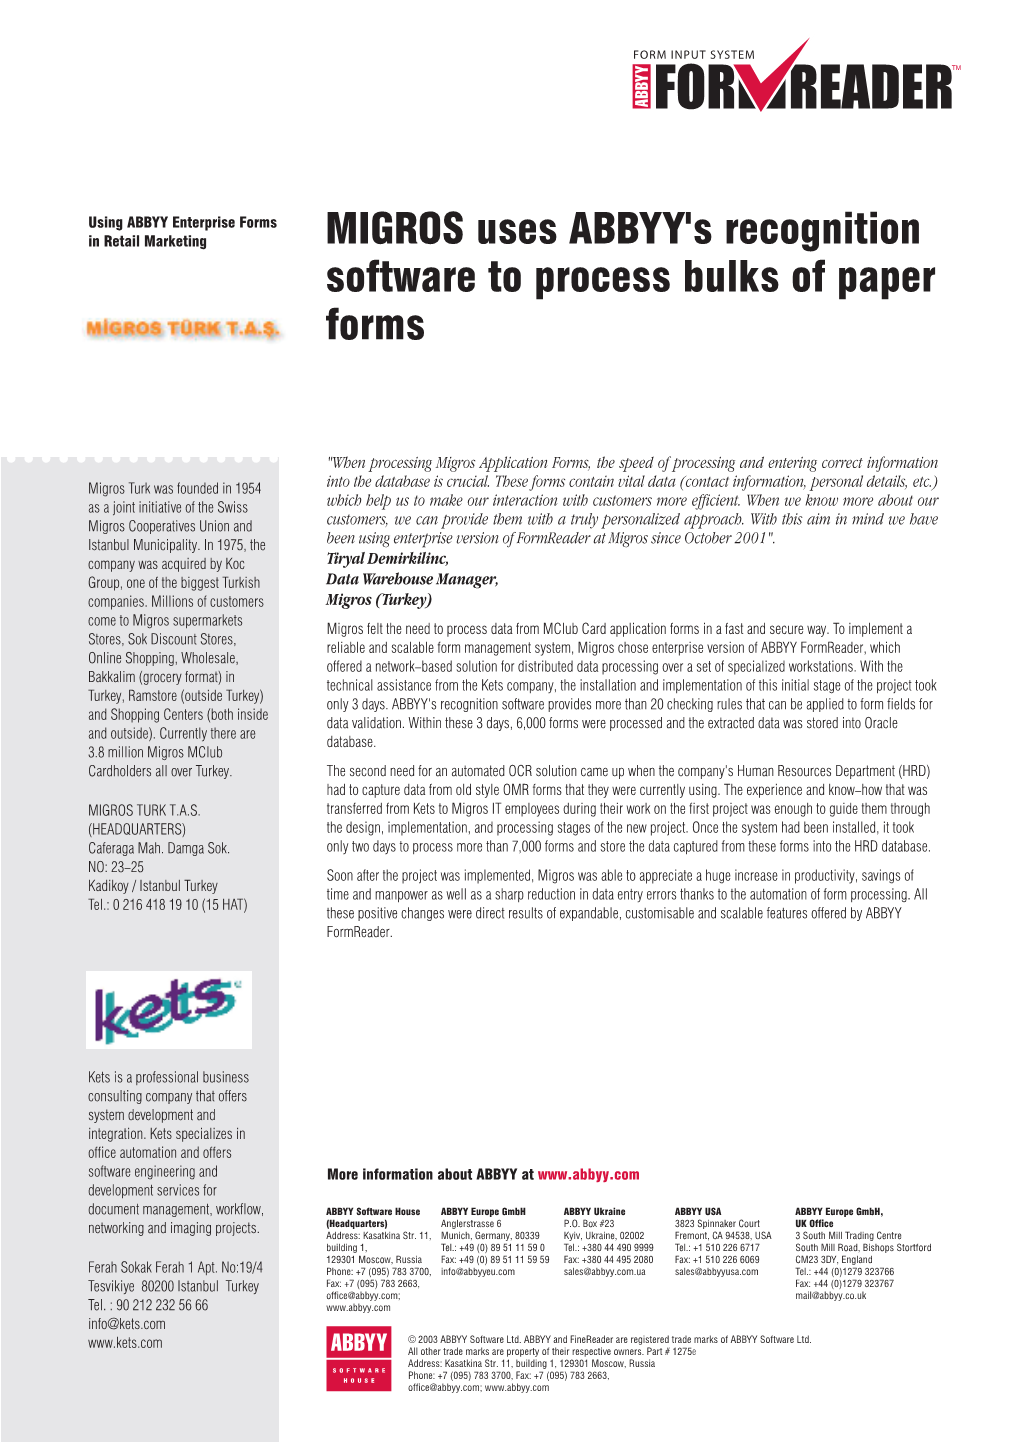 MIGROS Uses ABBYY's Recognition Software to Process Bulks of Paper Forms